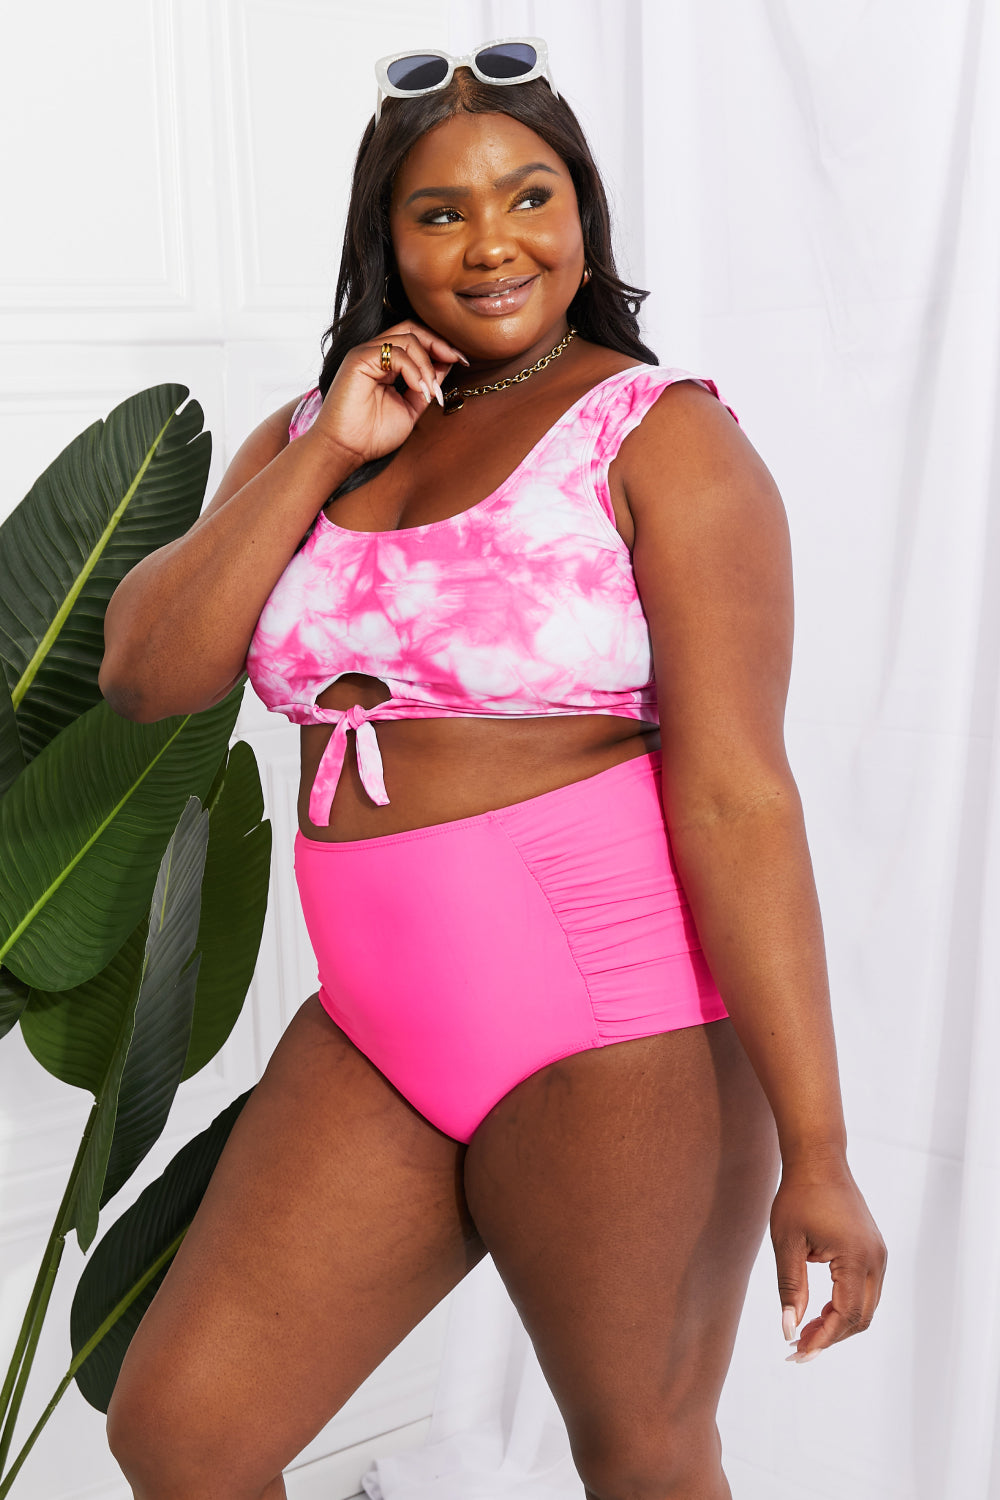 - Marina West Swim Sanibel Crop Swim Top and Ruched Bottoms Set in Pink - Ships from The US - womens bikini set at TFC&H Co.